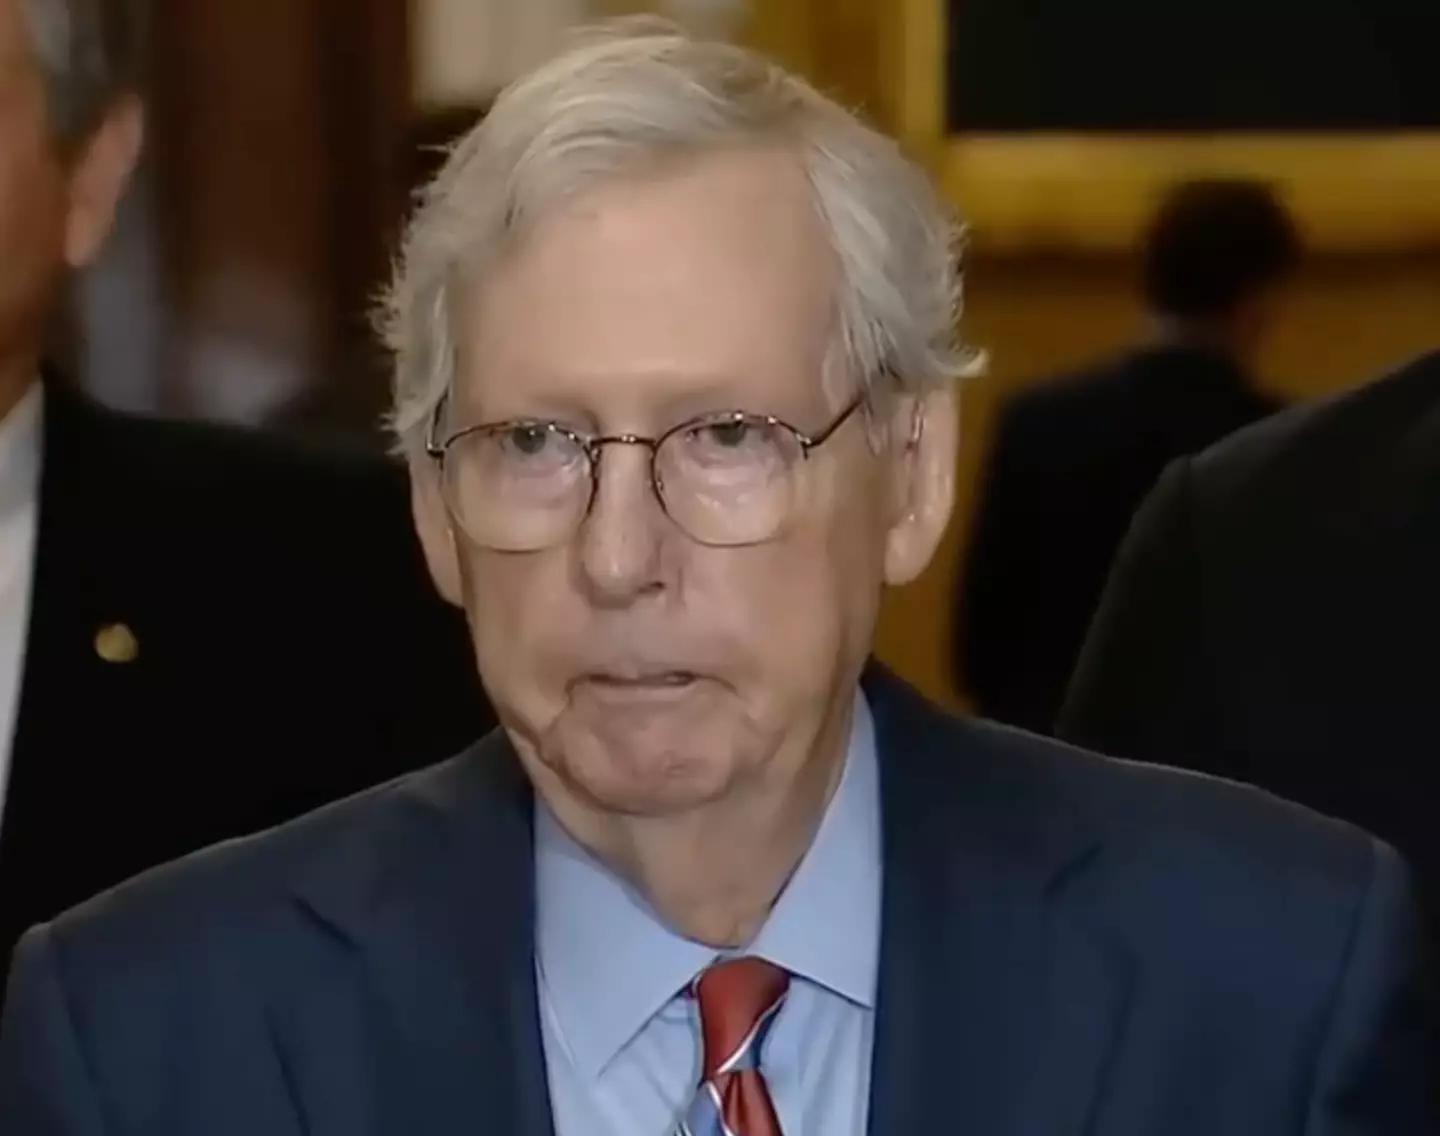 McConnell returned to the lectern after being led away.